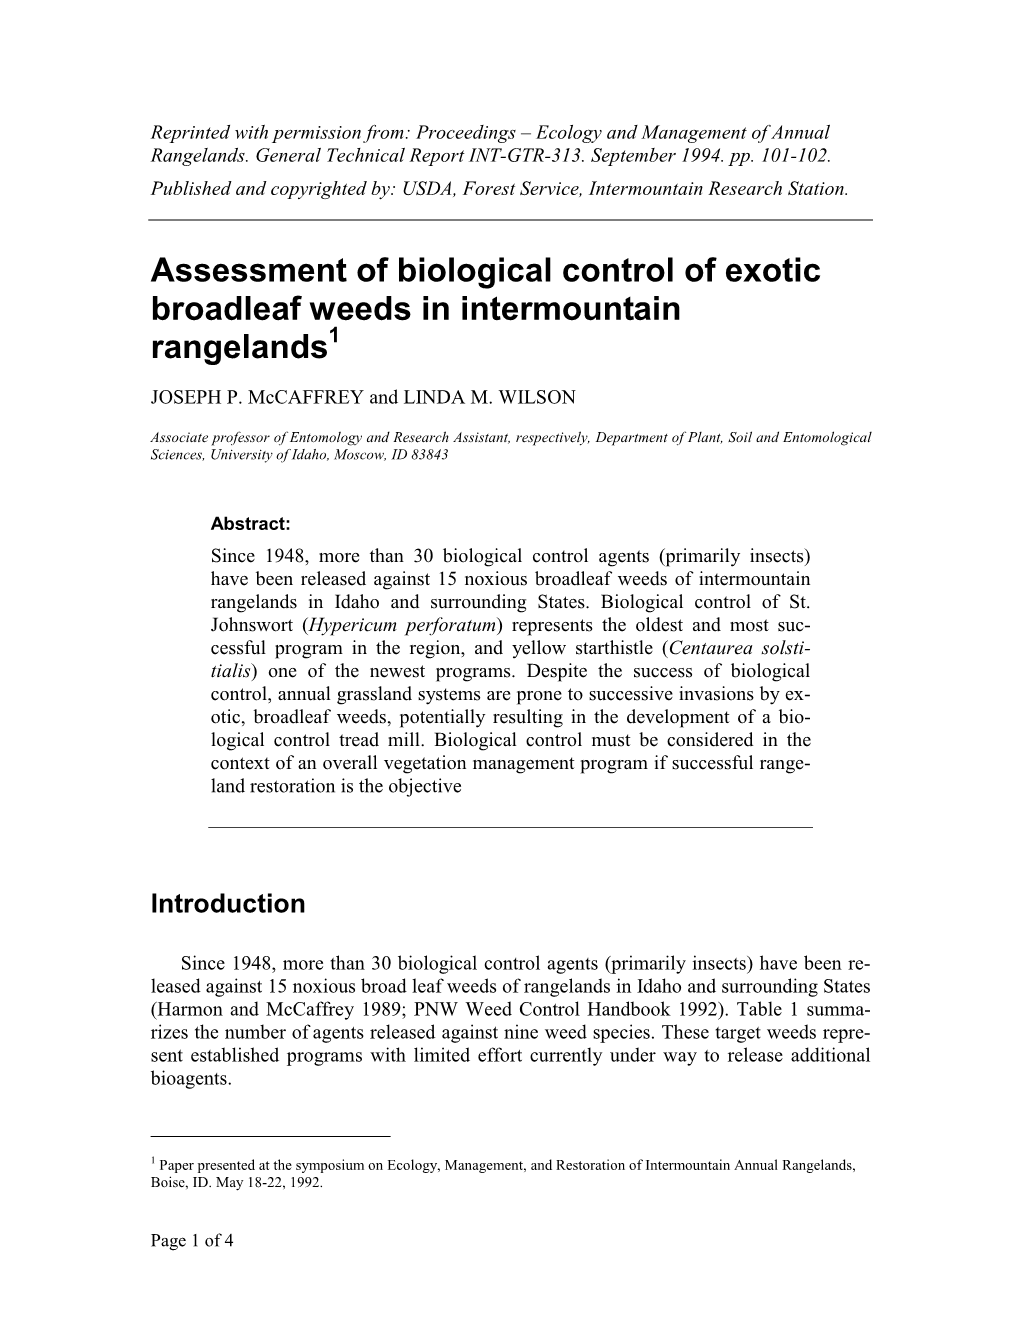 Assessment of Biological Control of Exotic Broadleaf Weeds in Intermountain Rangelands1